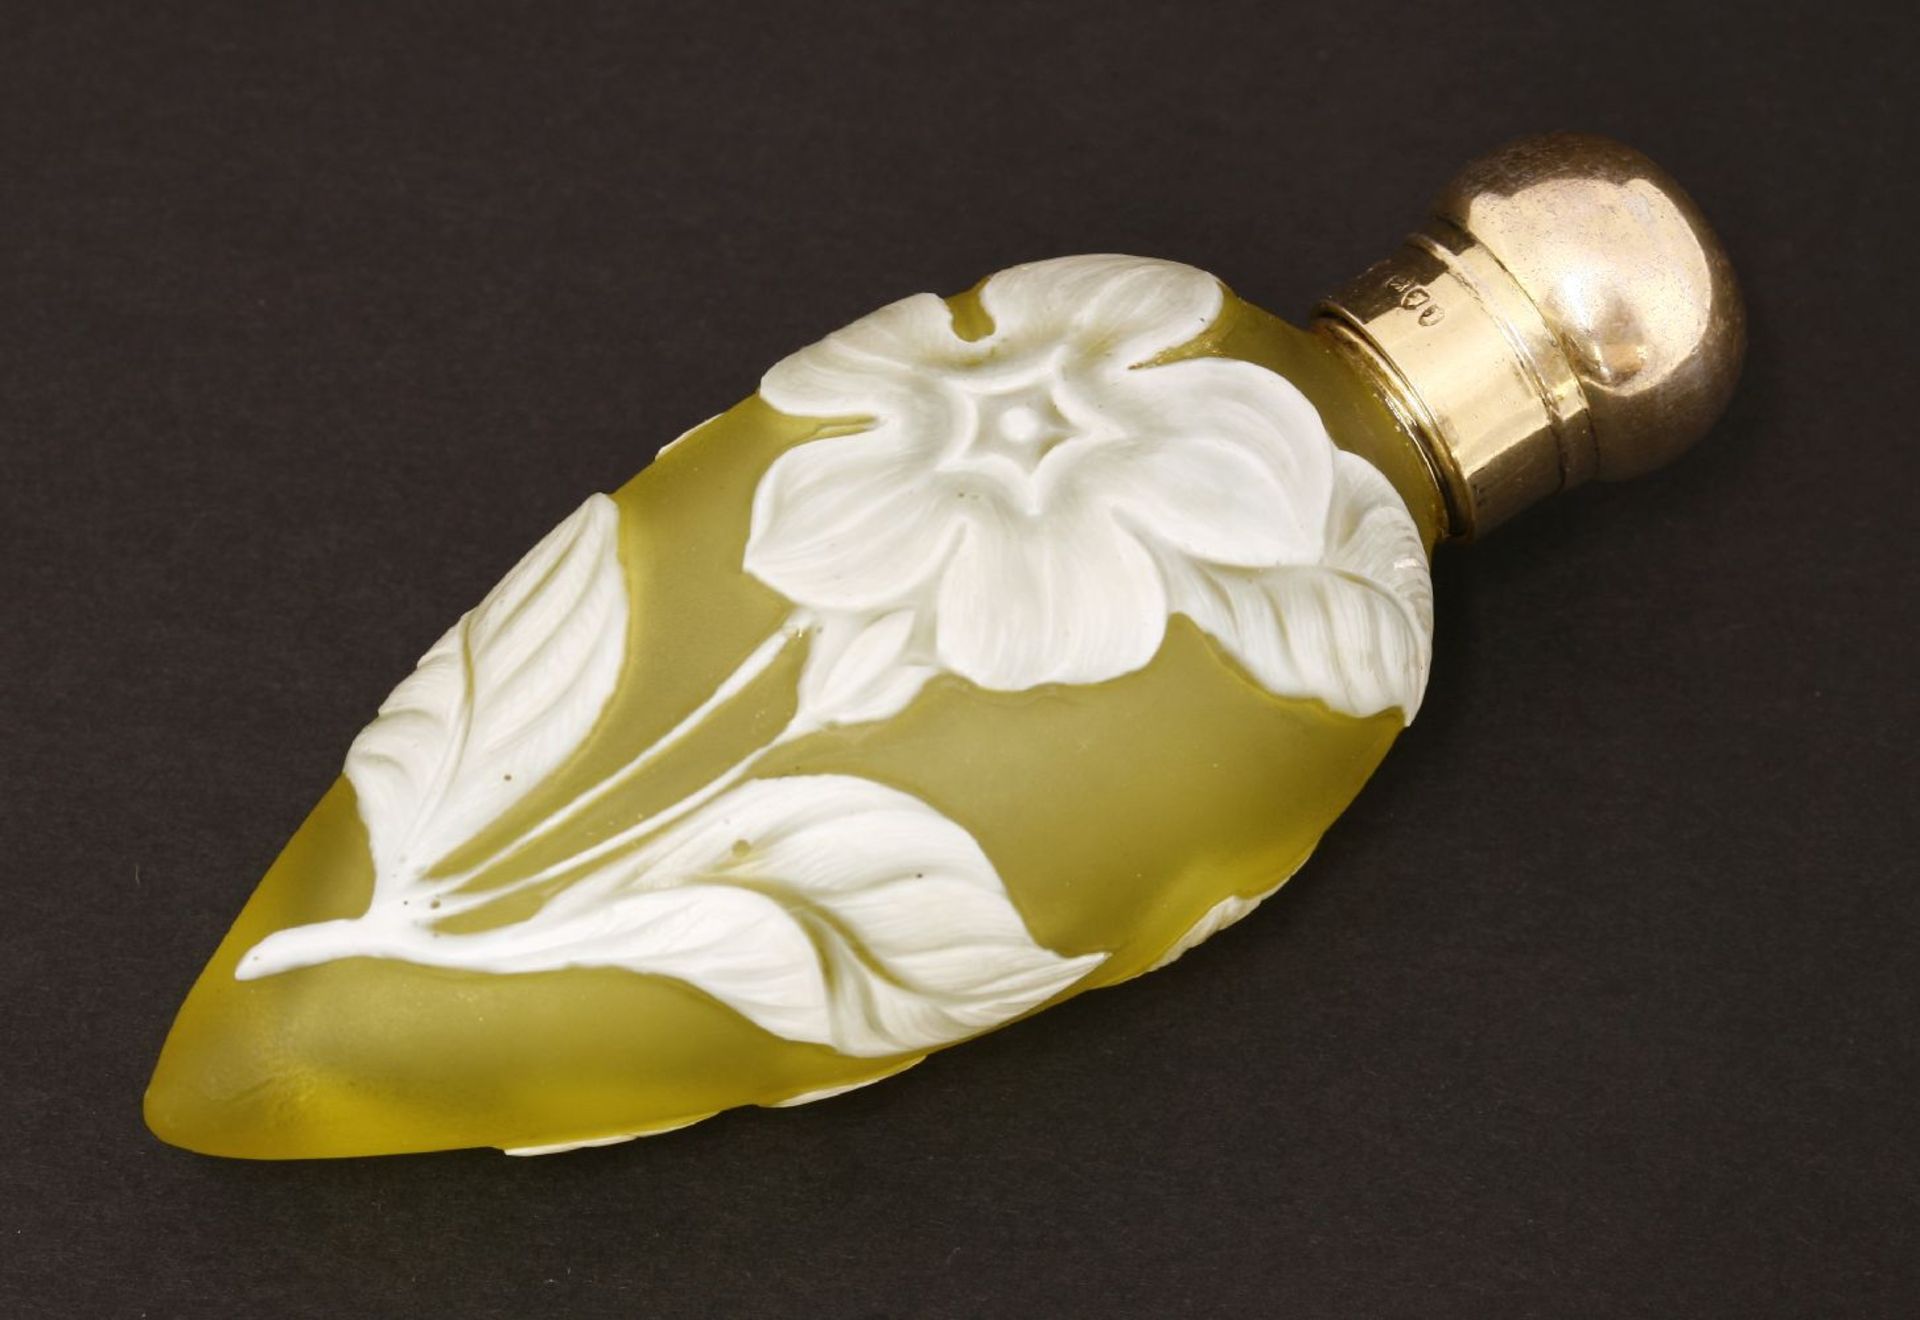 A cameo glass scent bottle,by Thomas Webb & Co, Stourbridge, the yellow glass of teardrop shape